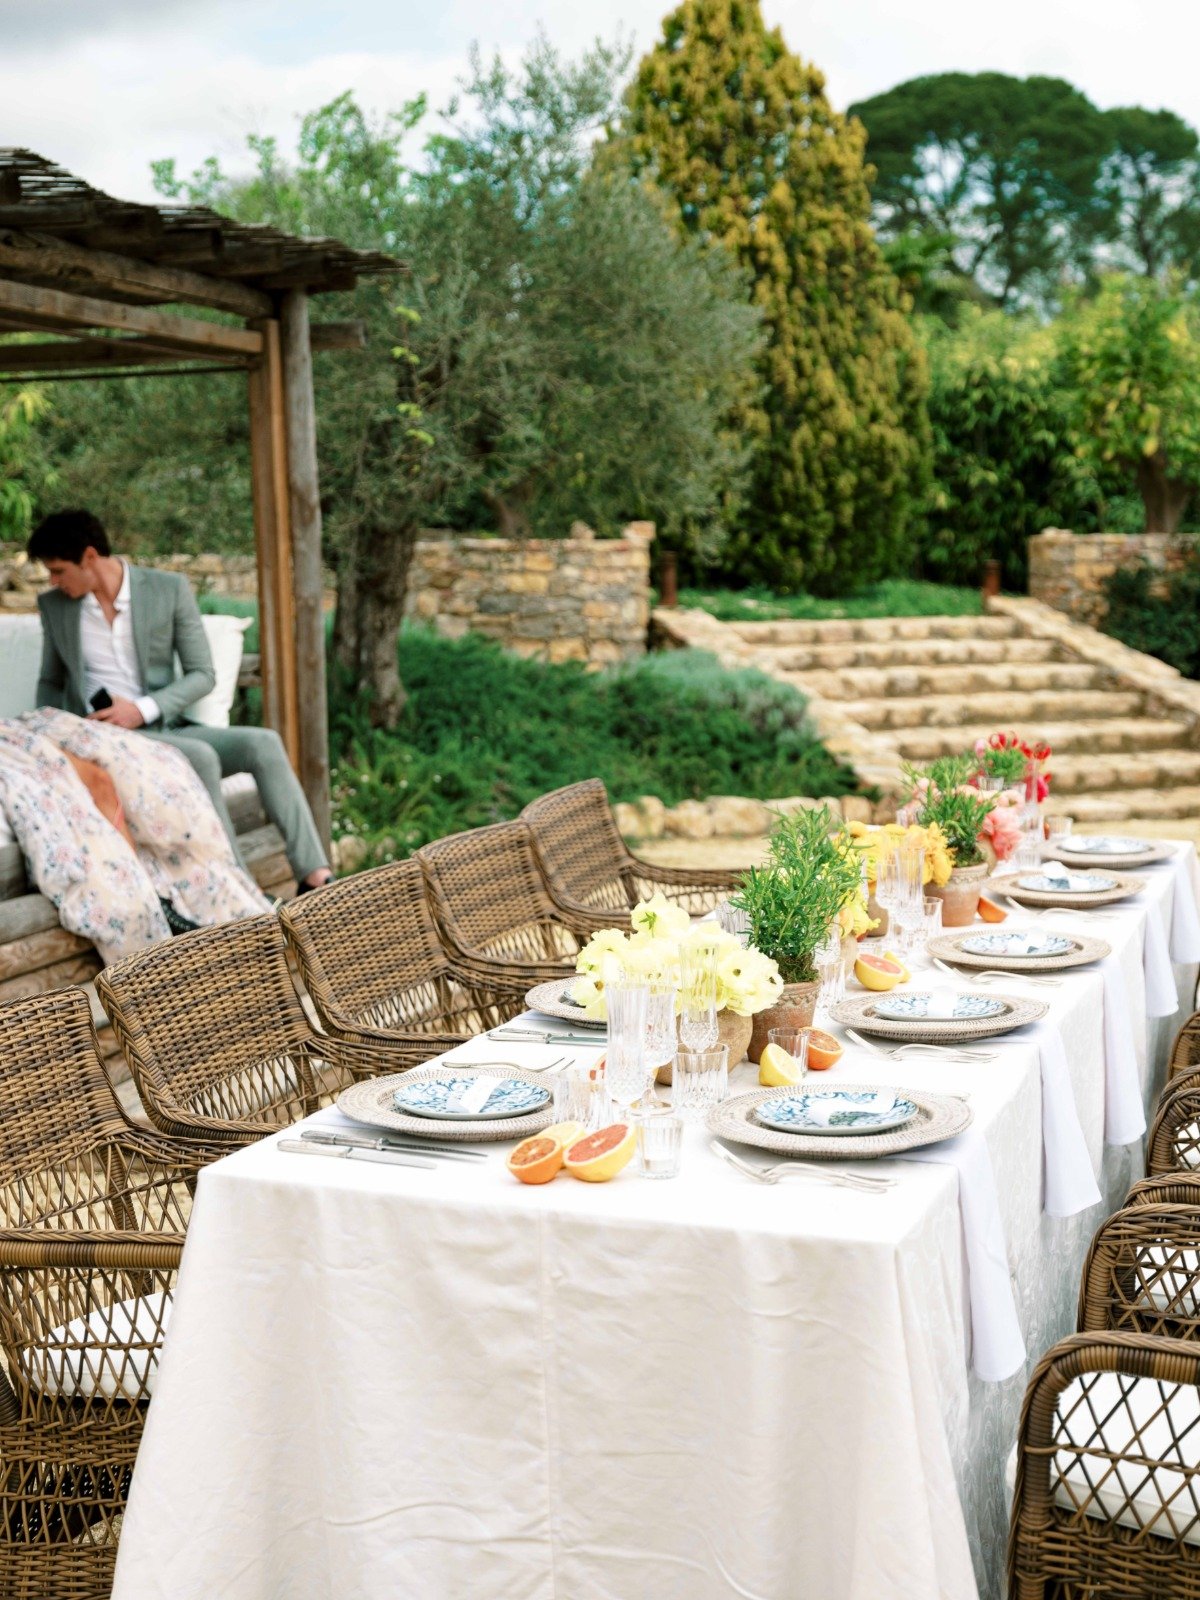 A Multi-Day Destination Wedding Could Actually Save You Money...Here's How